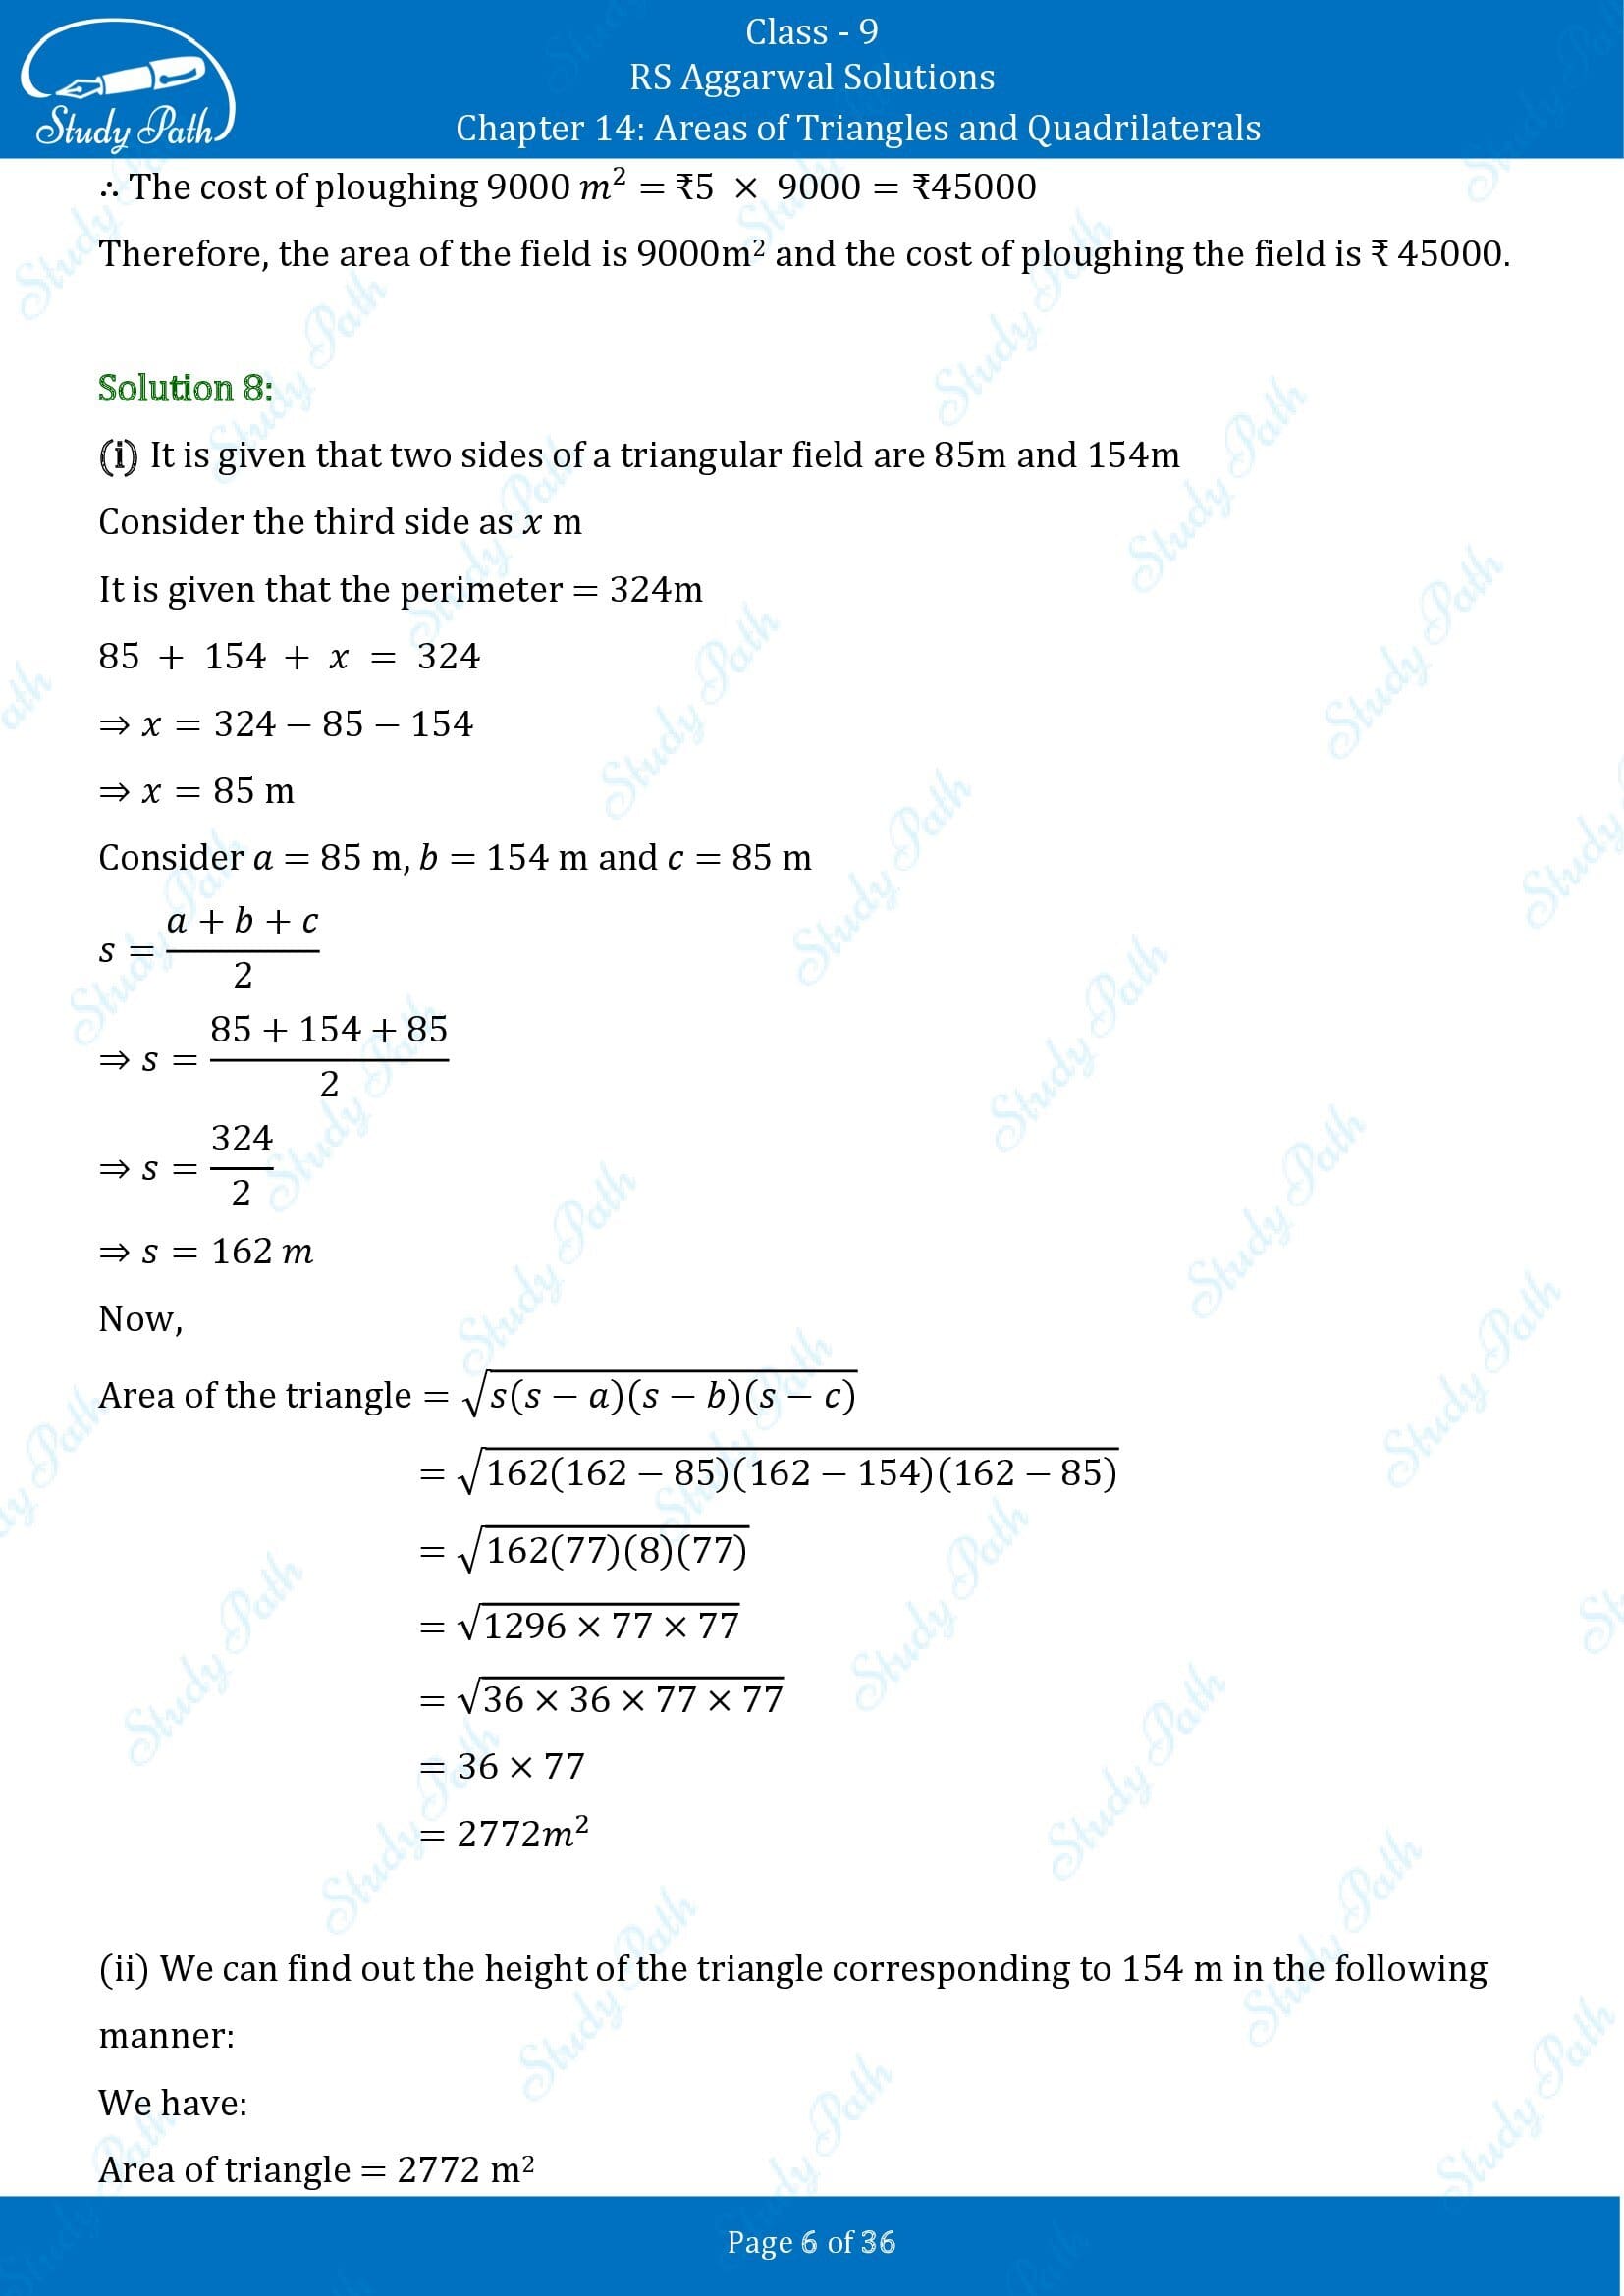 RS Aggarwal Solutions Class 9 Chapter 14 Areas of Triangles and Quadrilaterals Exercise 14 00006